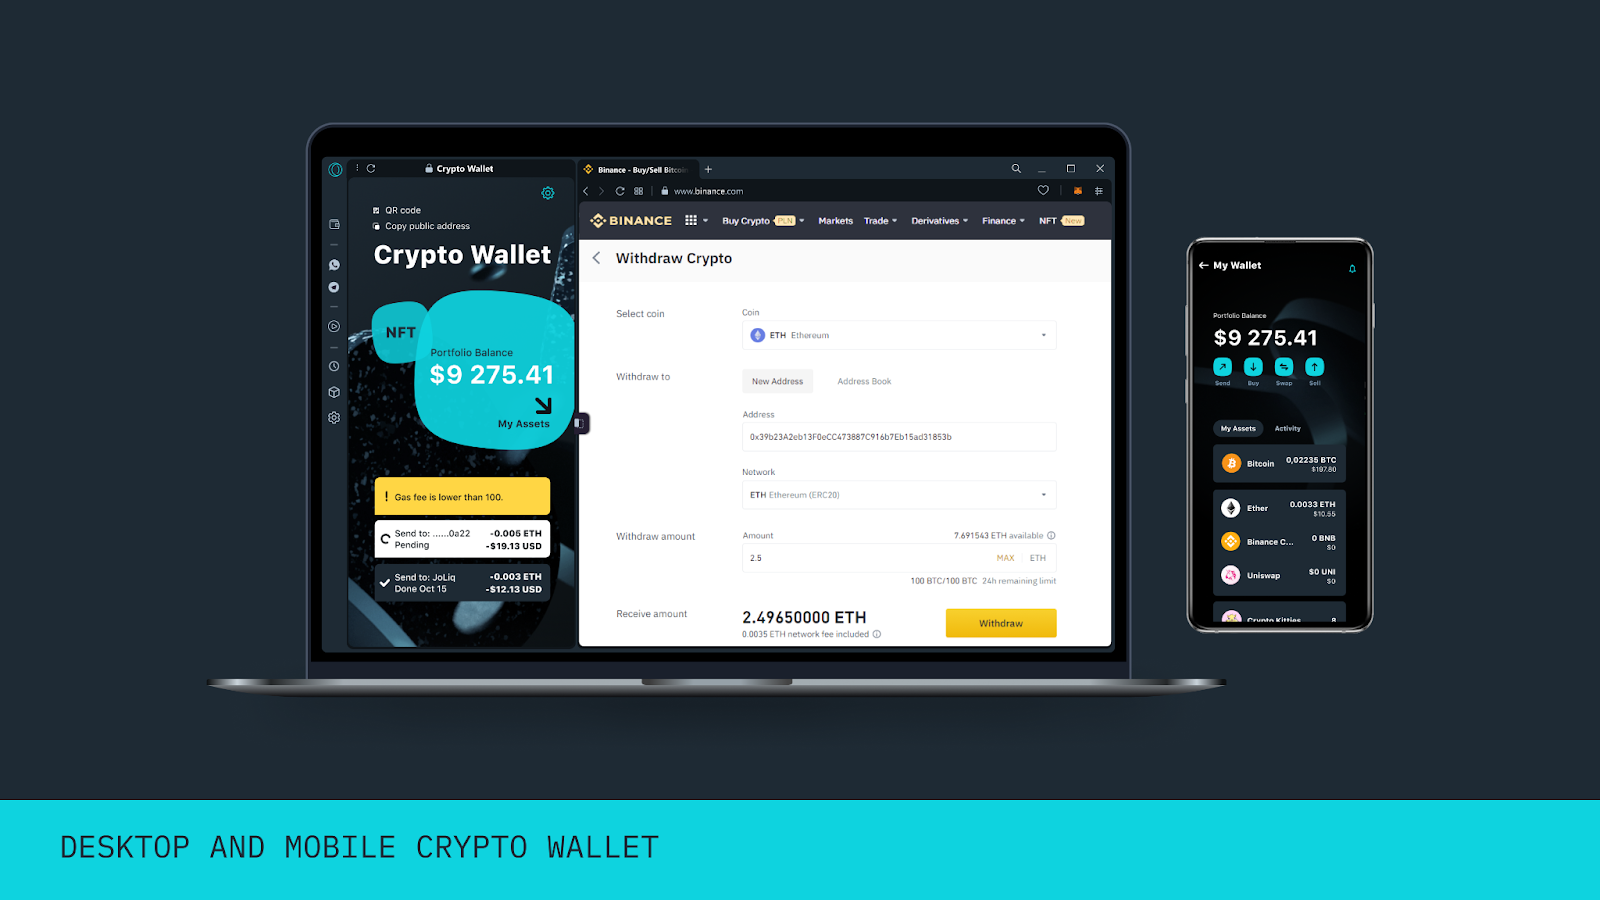 The Crypto Wallet in the Opera Crypto Browser project